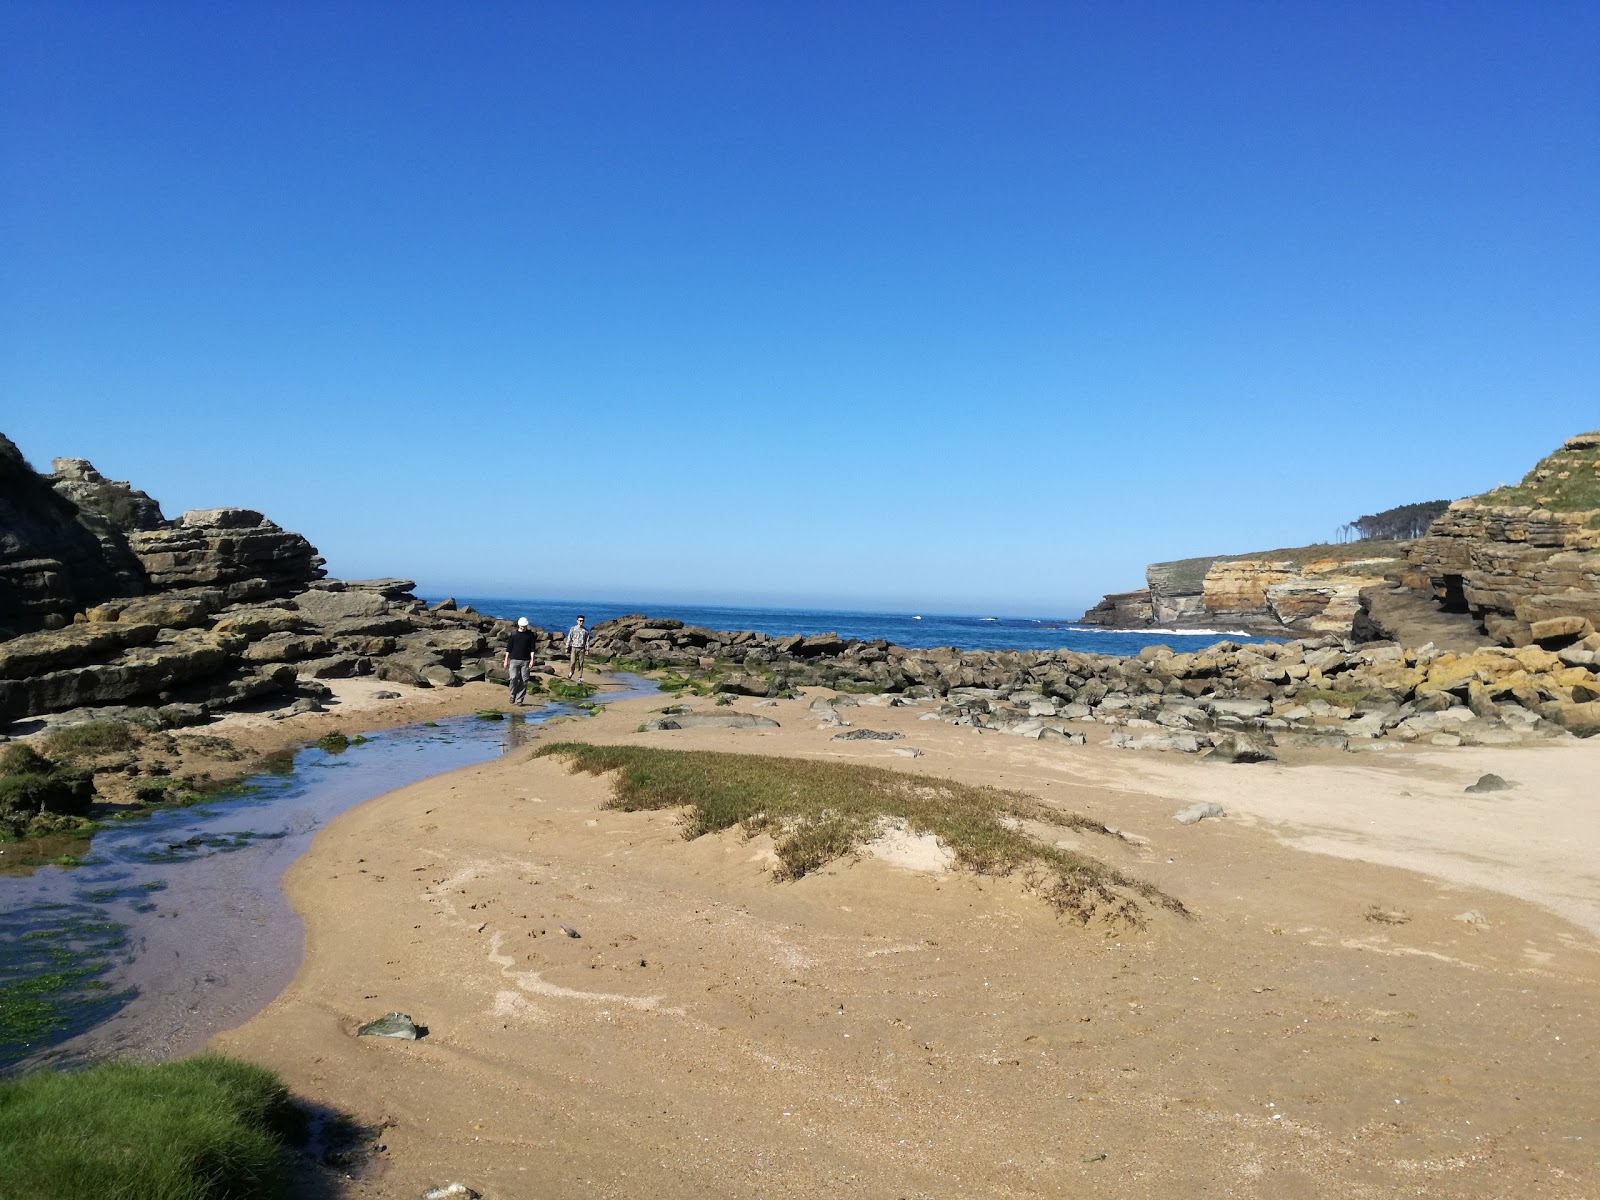 Photo of Playa de Arenillas with blue pure water surface